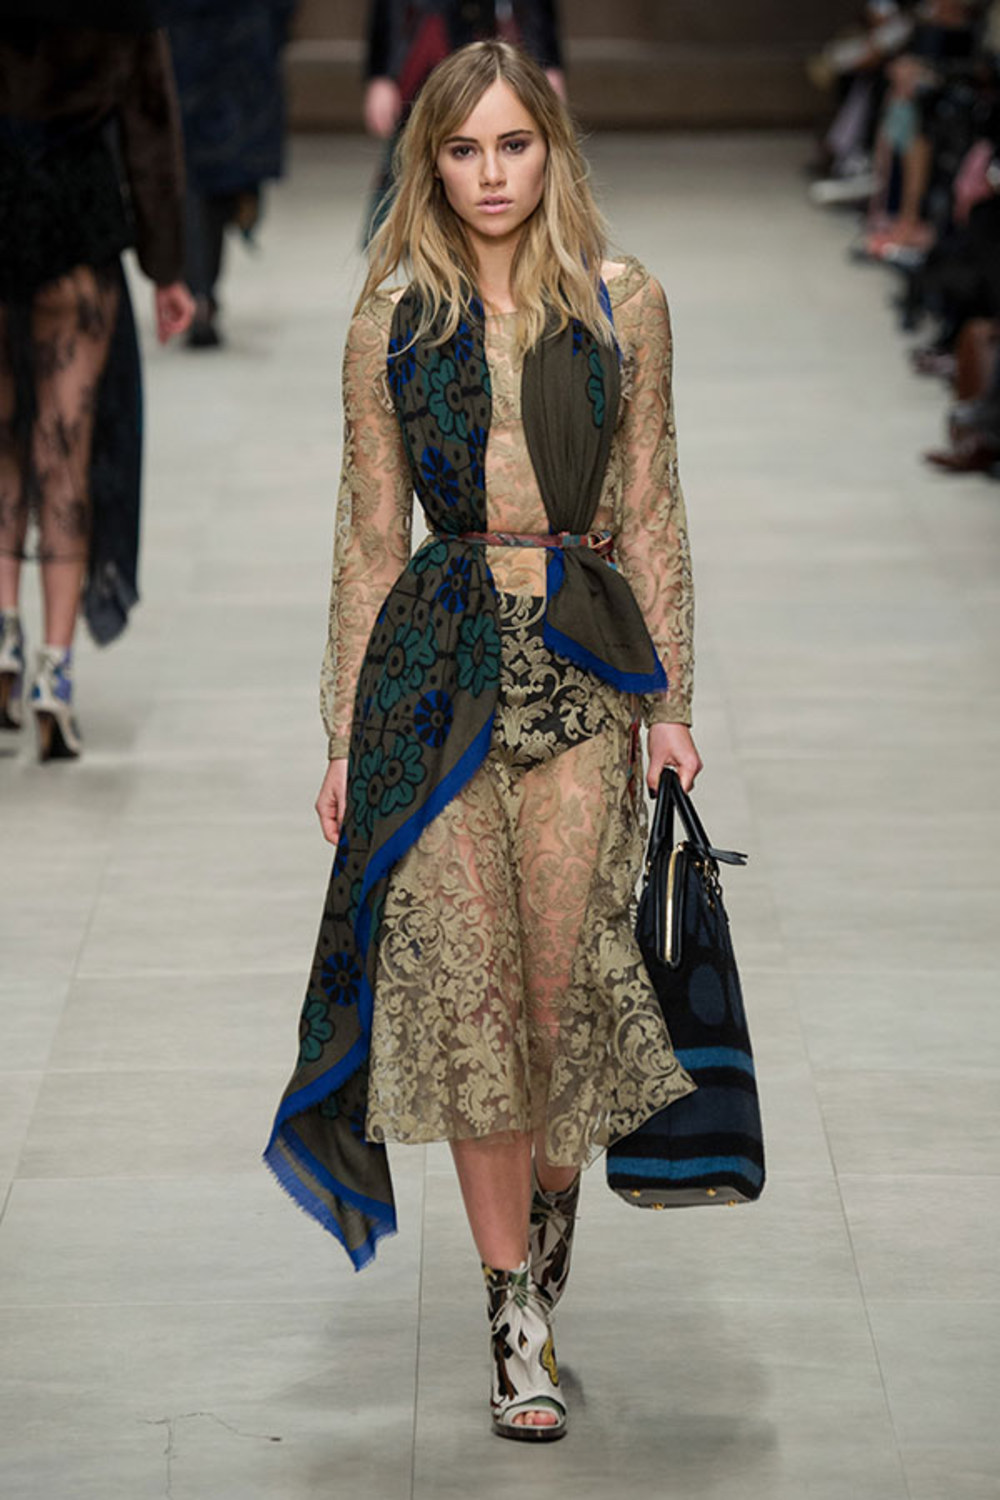 London Fashion Week collections for Autumn/Winter, 2014-2015 - Women ...